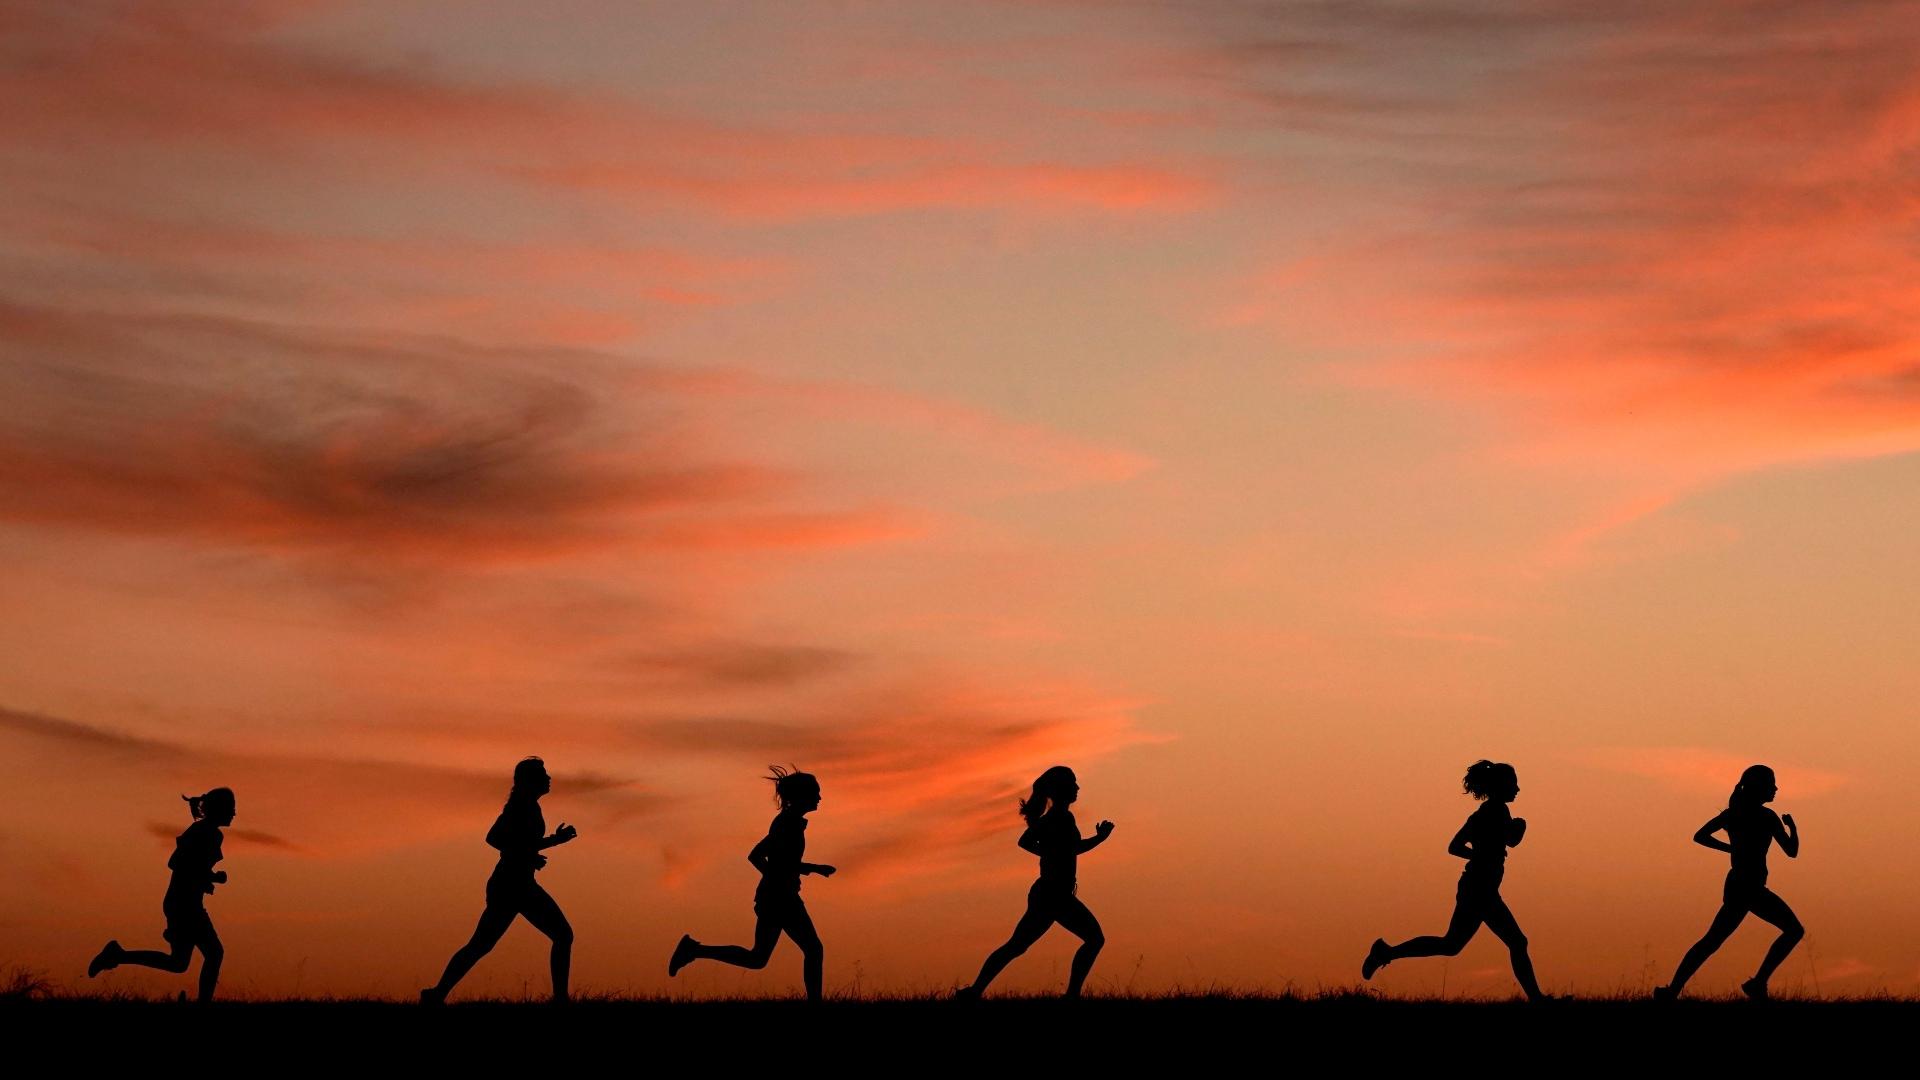 High school students run at sunset as they practice for the track and field season Monday, Feb. 28, 2022, in Shawnee, Kan. (AP Photo / Charlie Riedel, File)